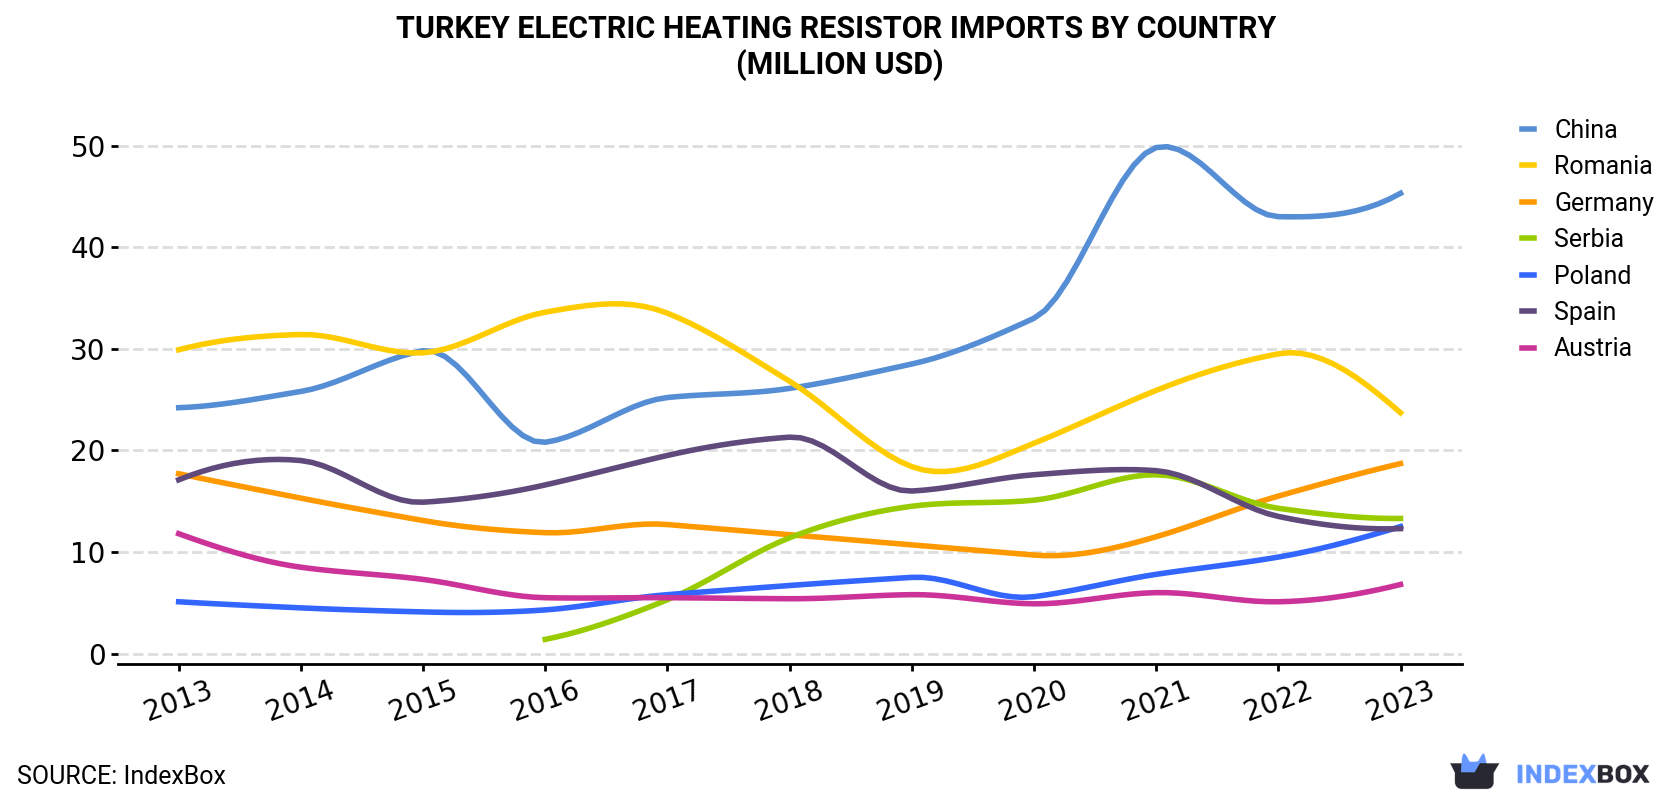 Turkey Electric Heating Resistor Imports By Country (Million USD)